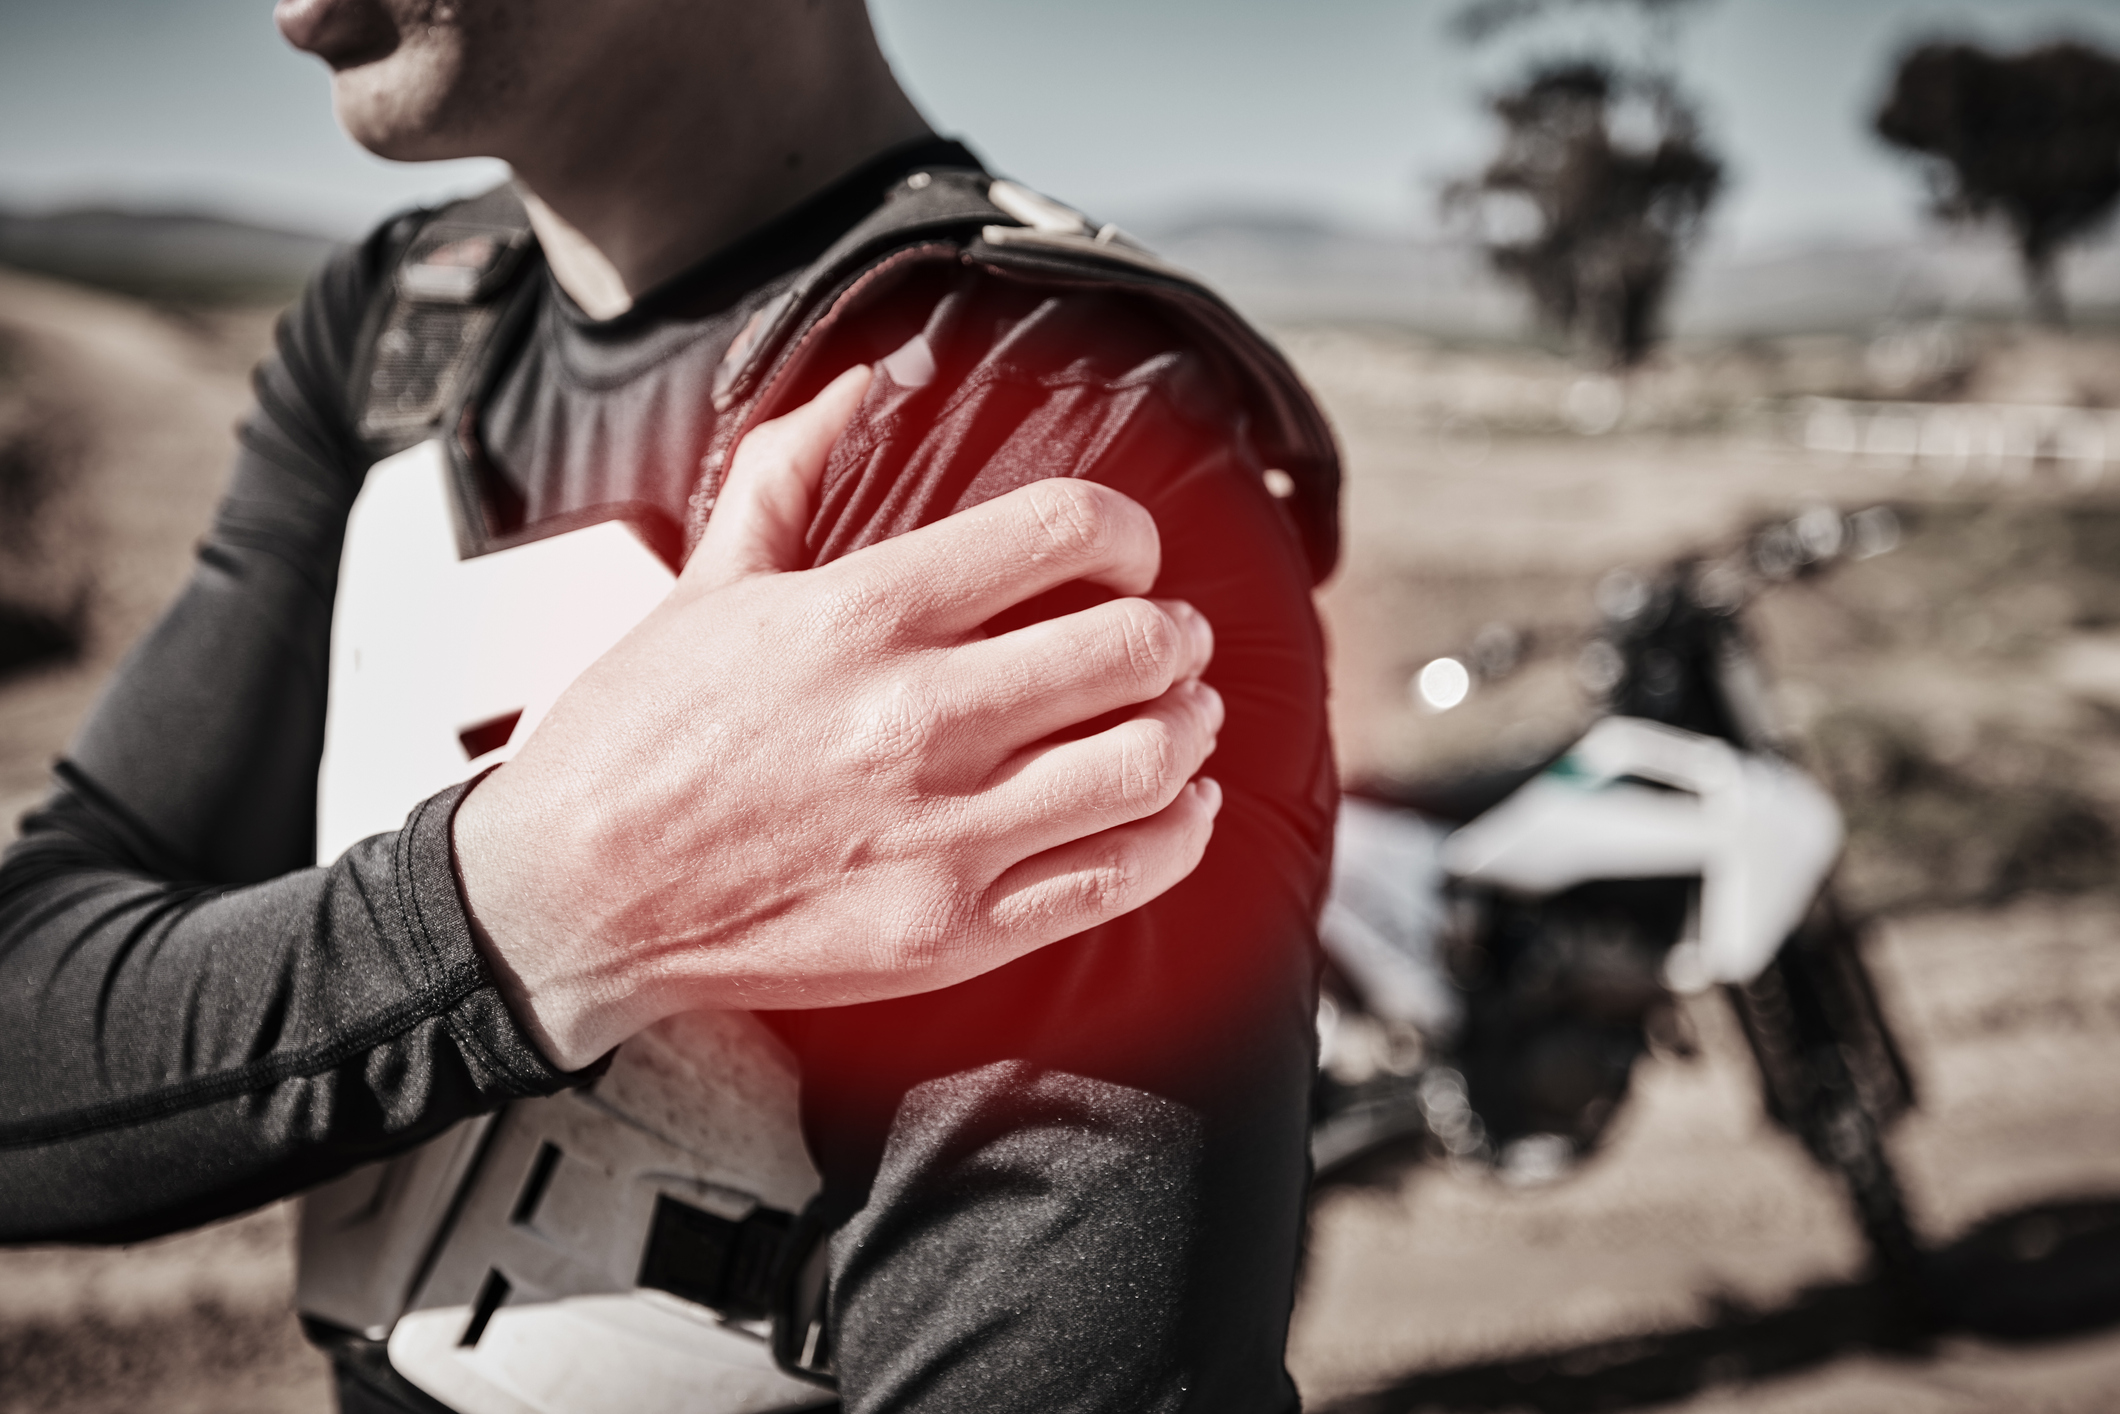 Why Do Motorcycle Accidents End in Catastrophic Injuries?